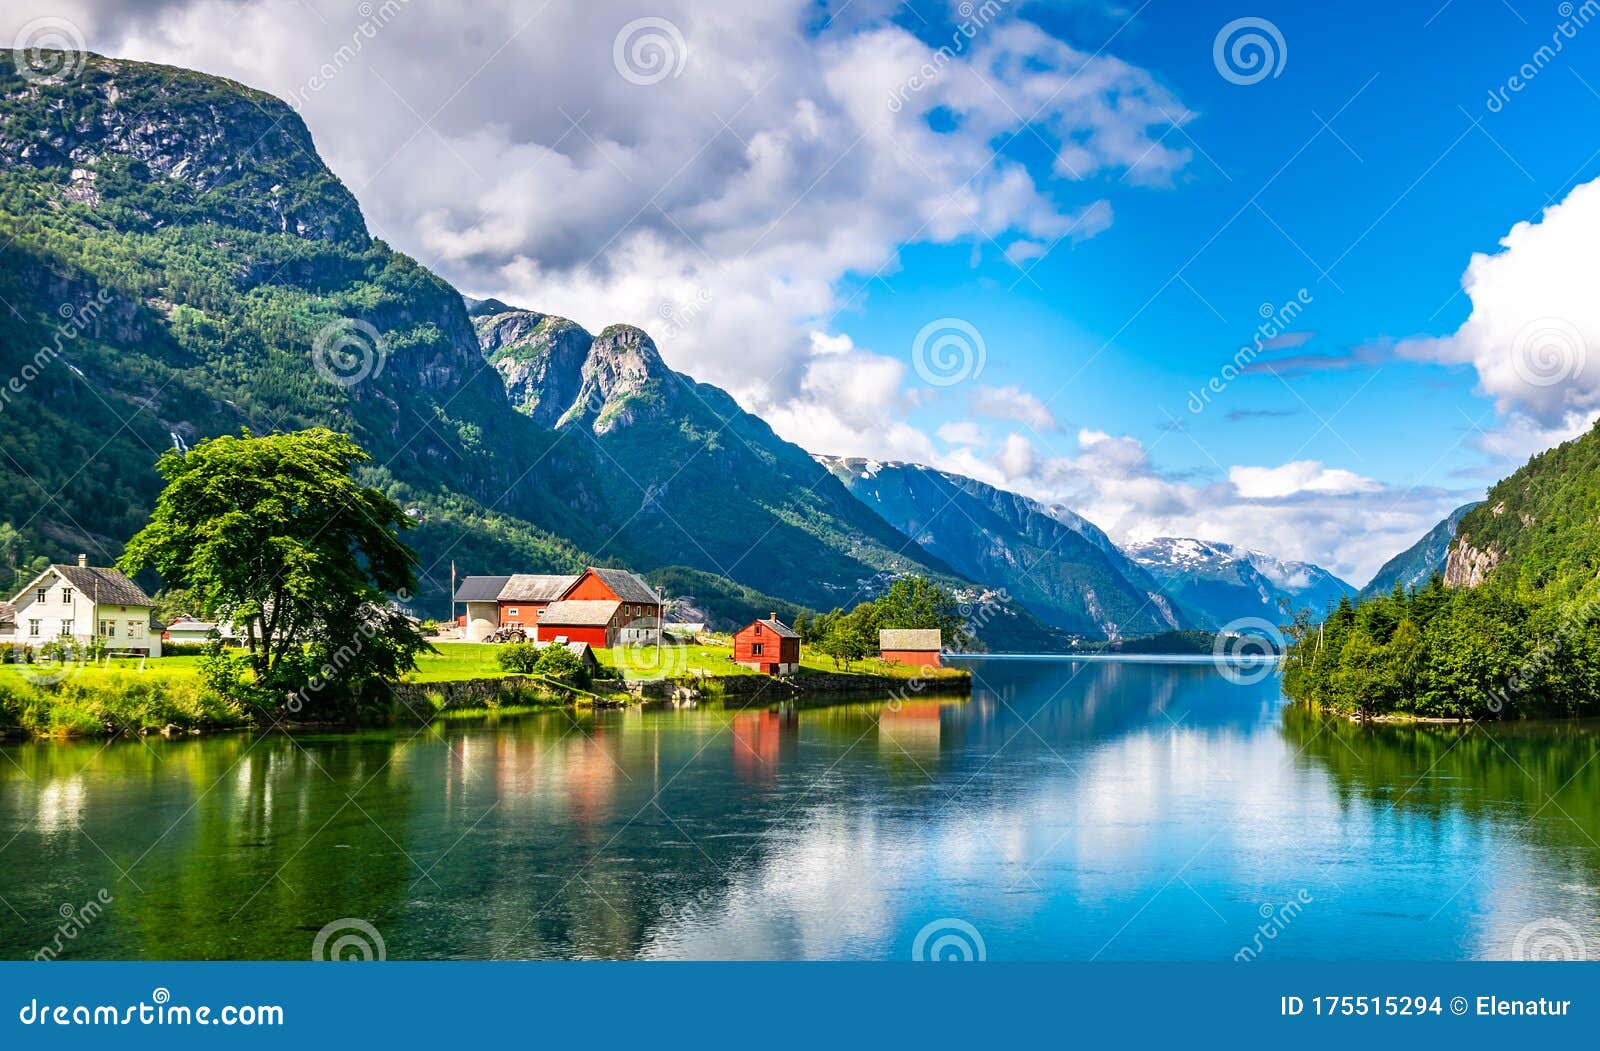 Seks Supersonic hastighed Edition Amazing Nature View with Fjord and Mountains. Beautiful Reflection.  Location: Scandinavian Mountains, Norway. Artistic Picture. Stock Photo -  Image of fjord, nature: 175515294